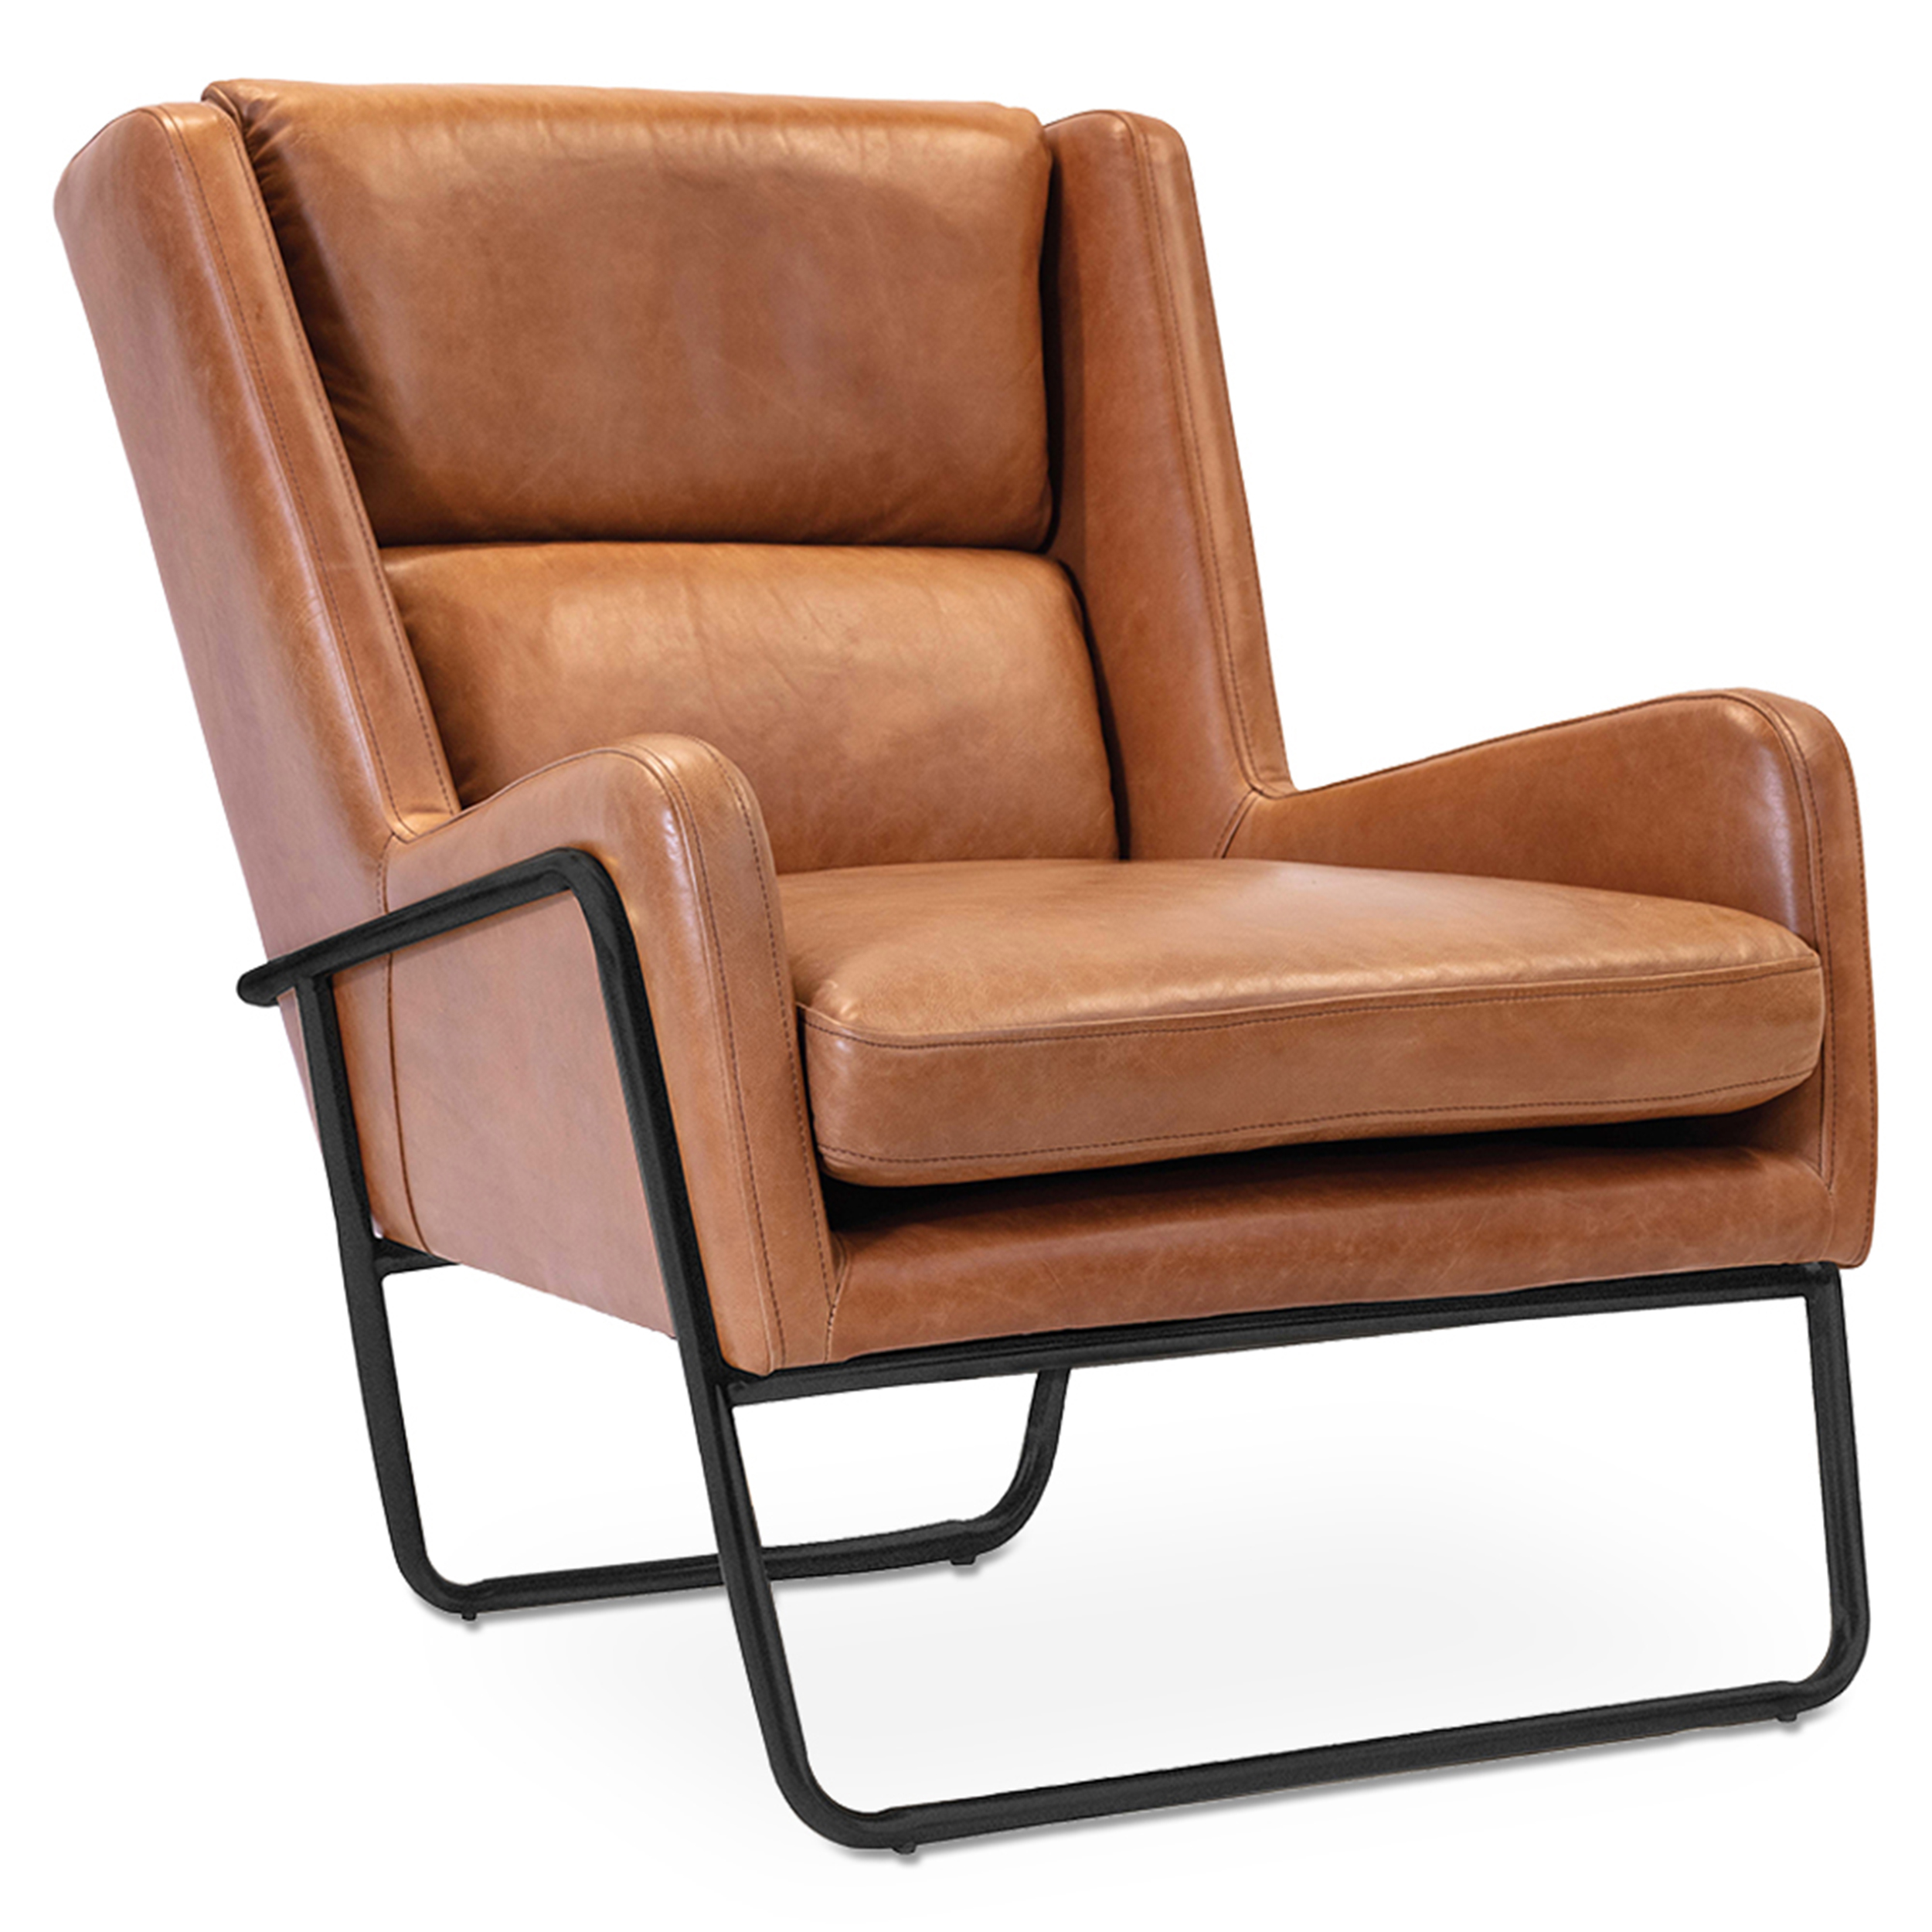 WS - London armchair - Light brown & Black (Front angle)